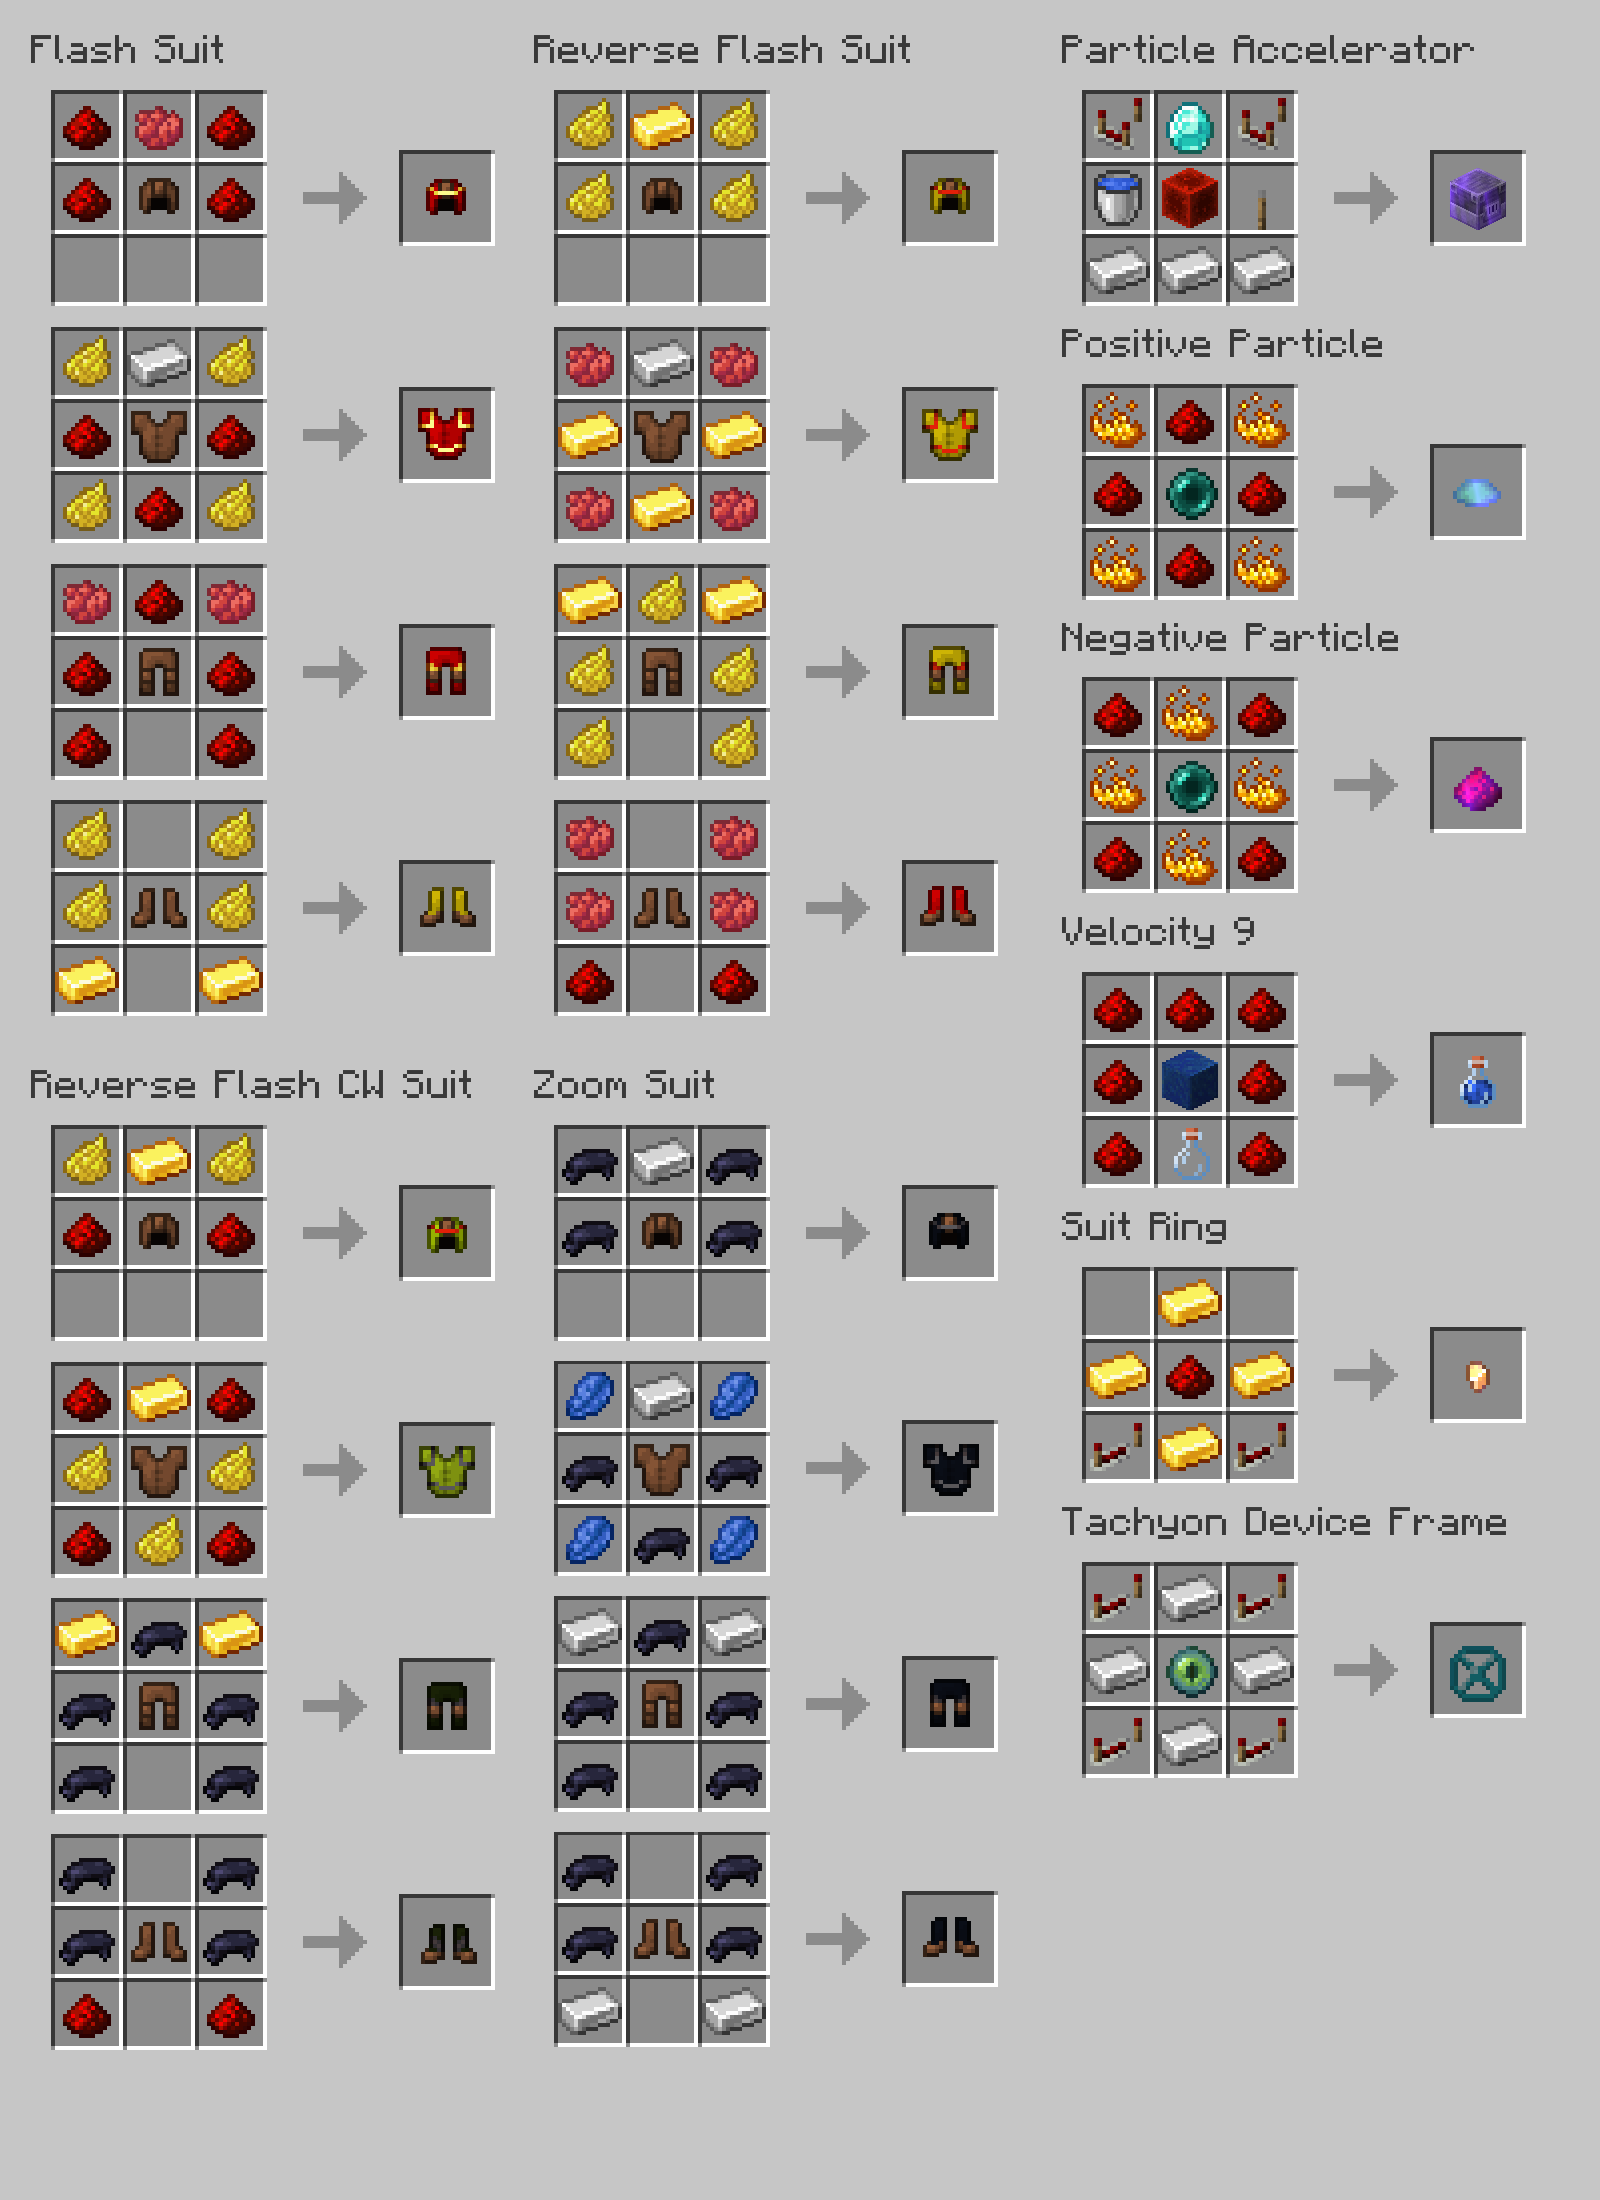 This picture contains recipes for all craftable items included in this data pack